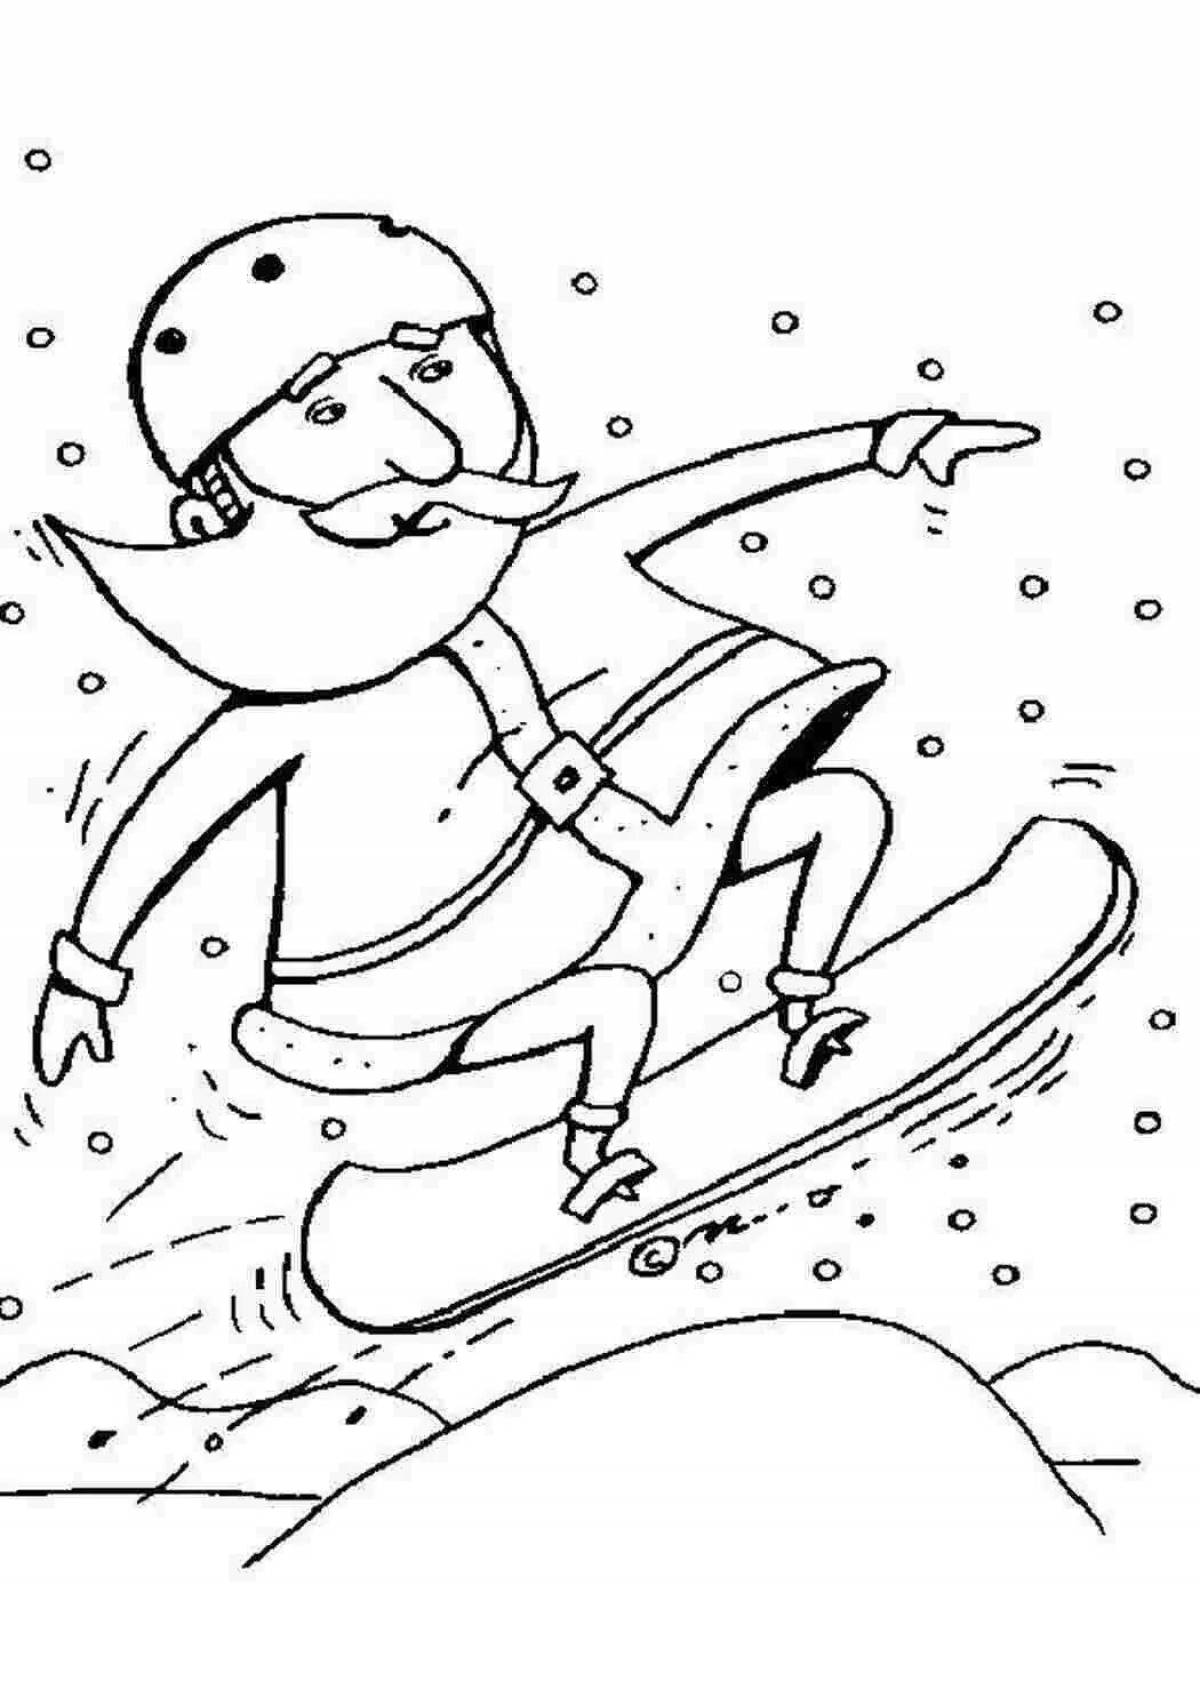 Colorful snowboard coloring page for kids